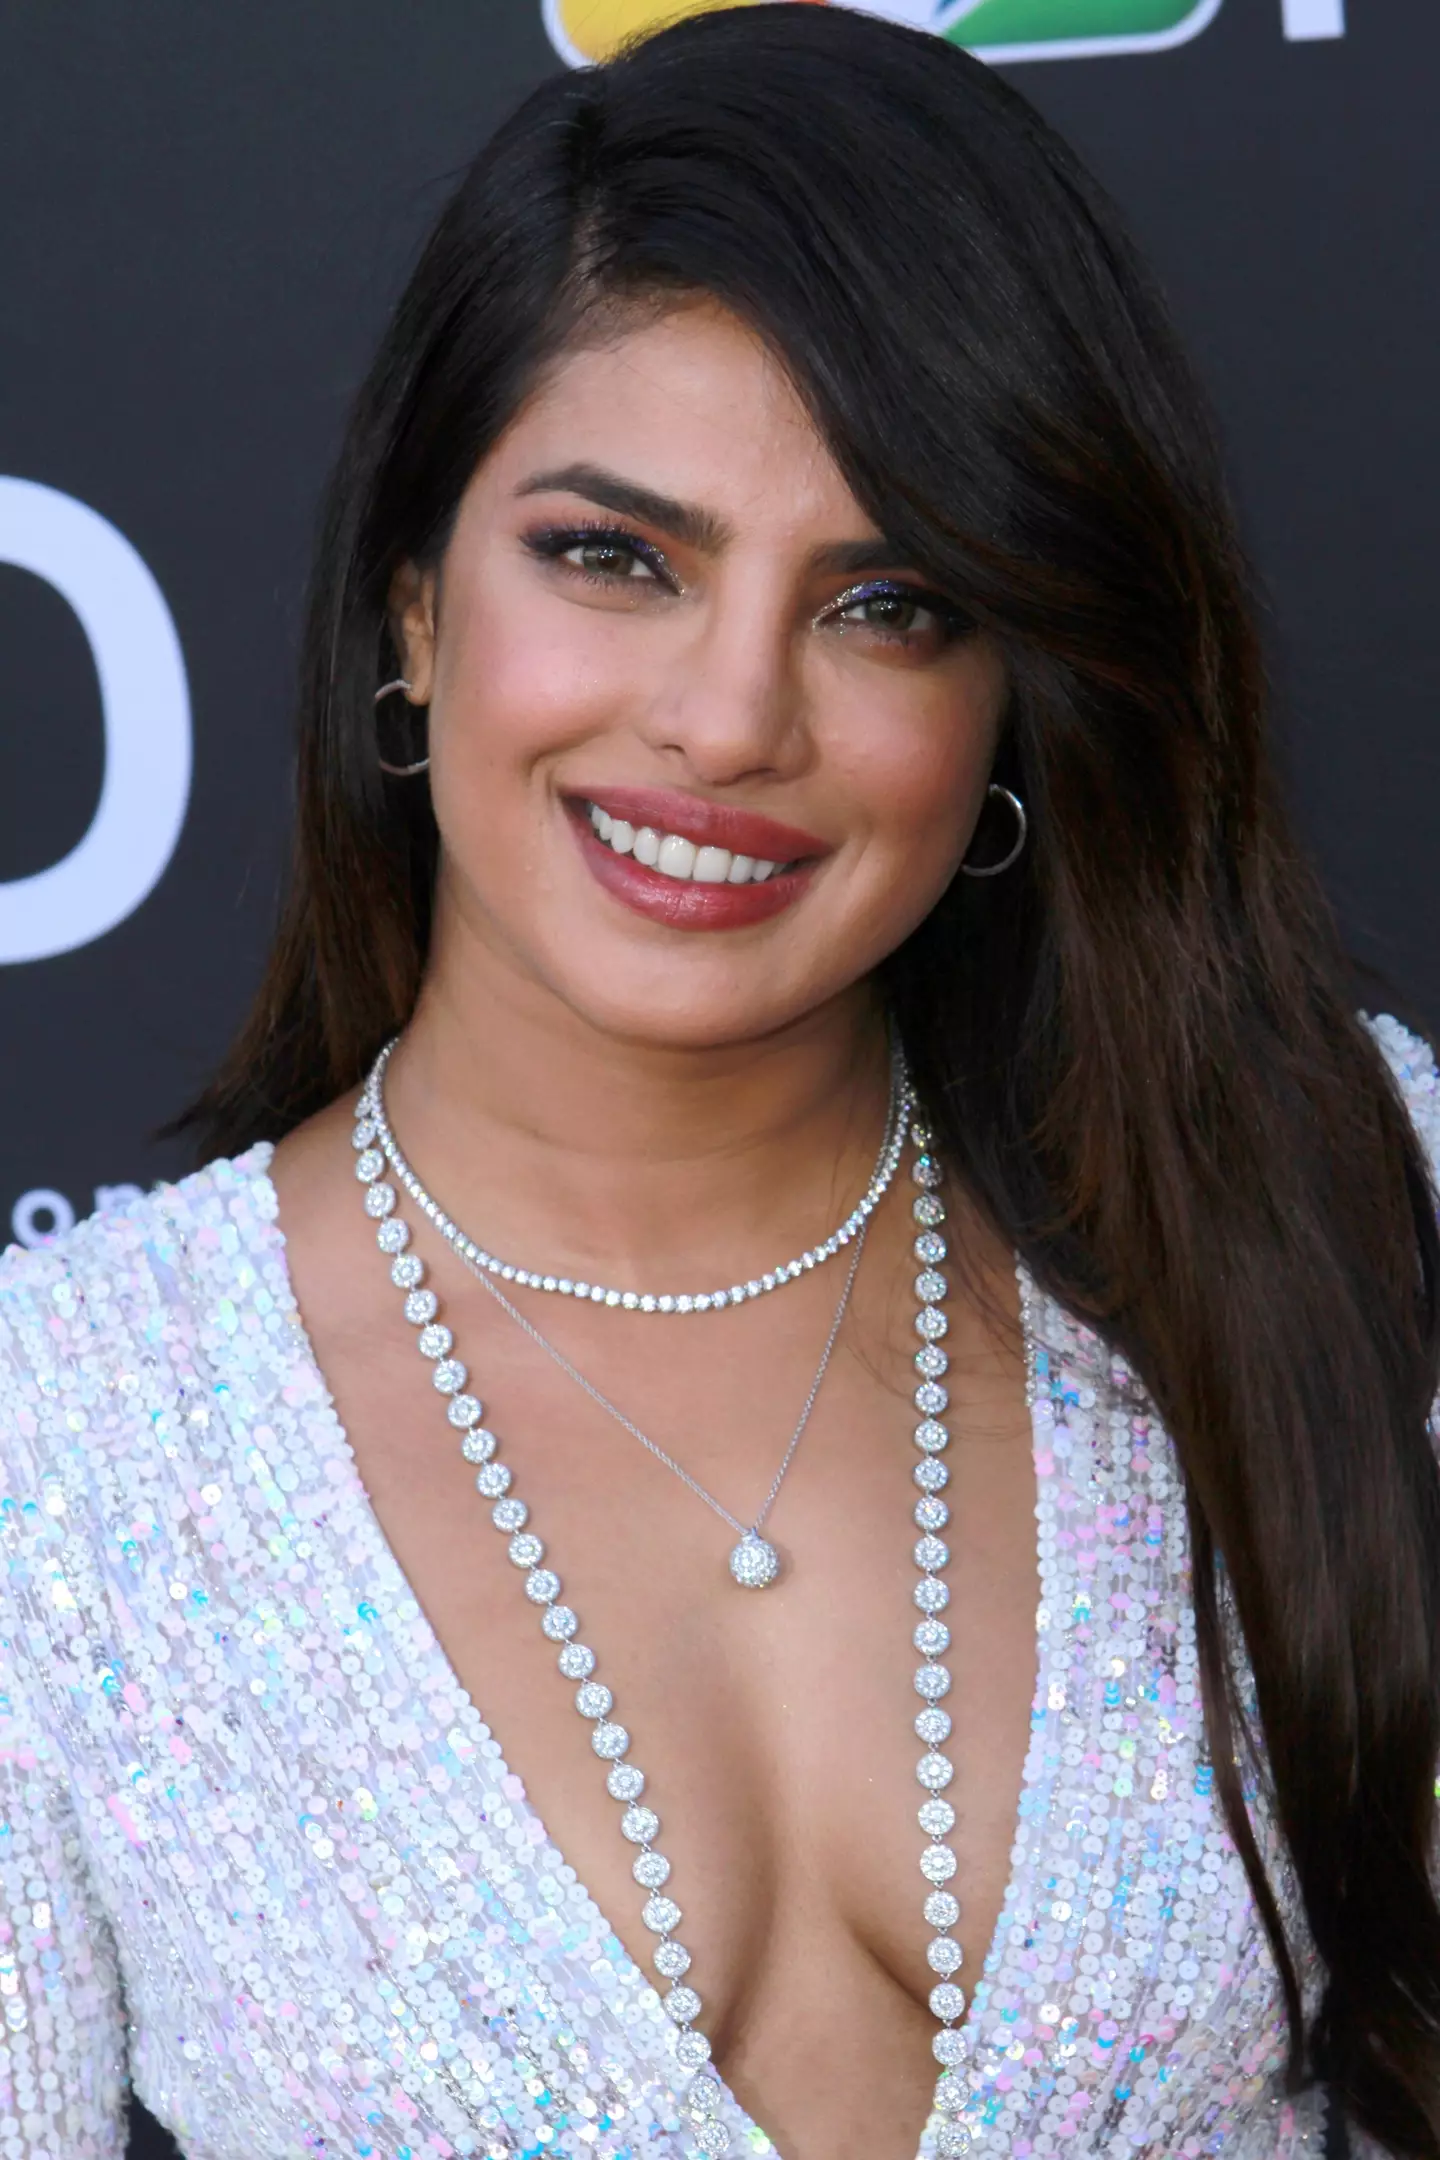 The Bollywood star says she's always been treated differently because of her gender.